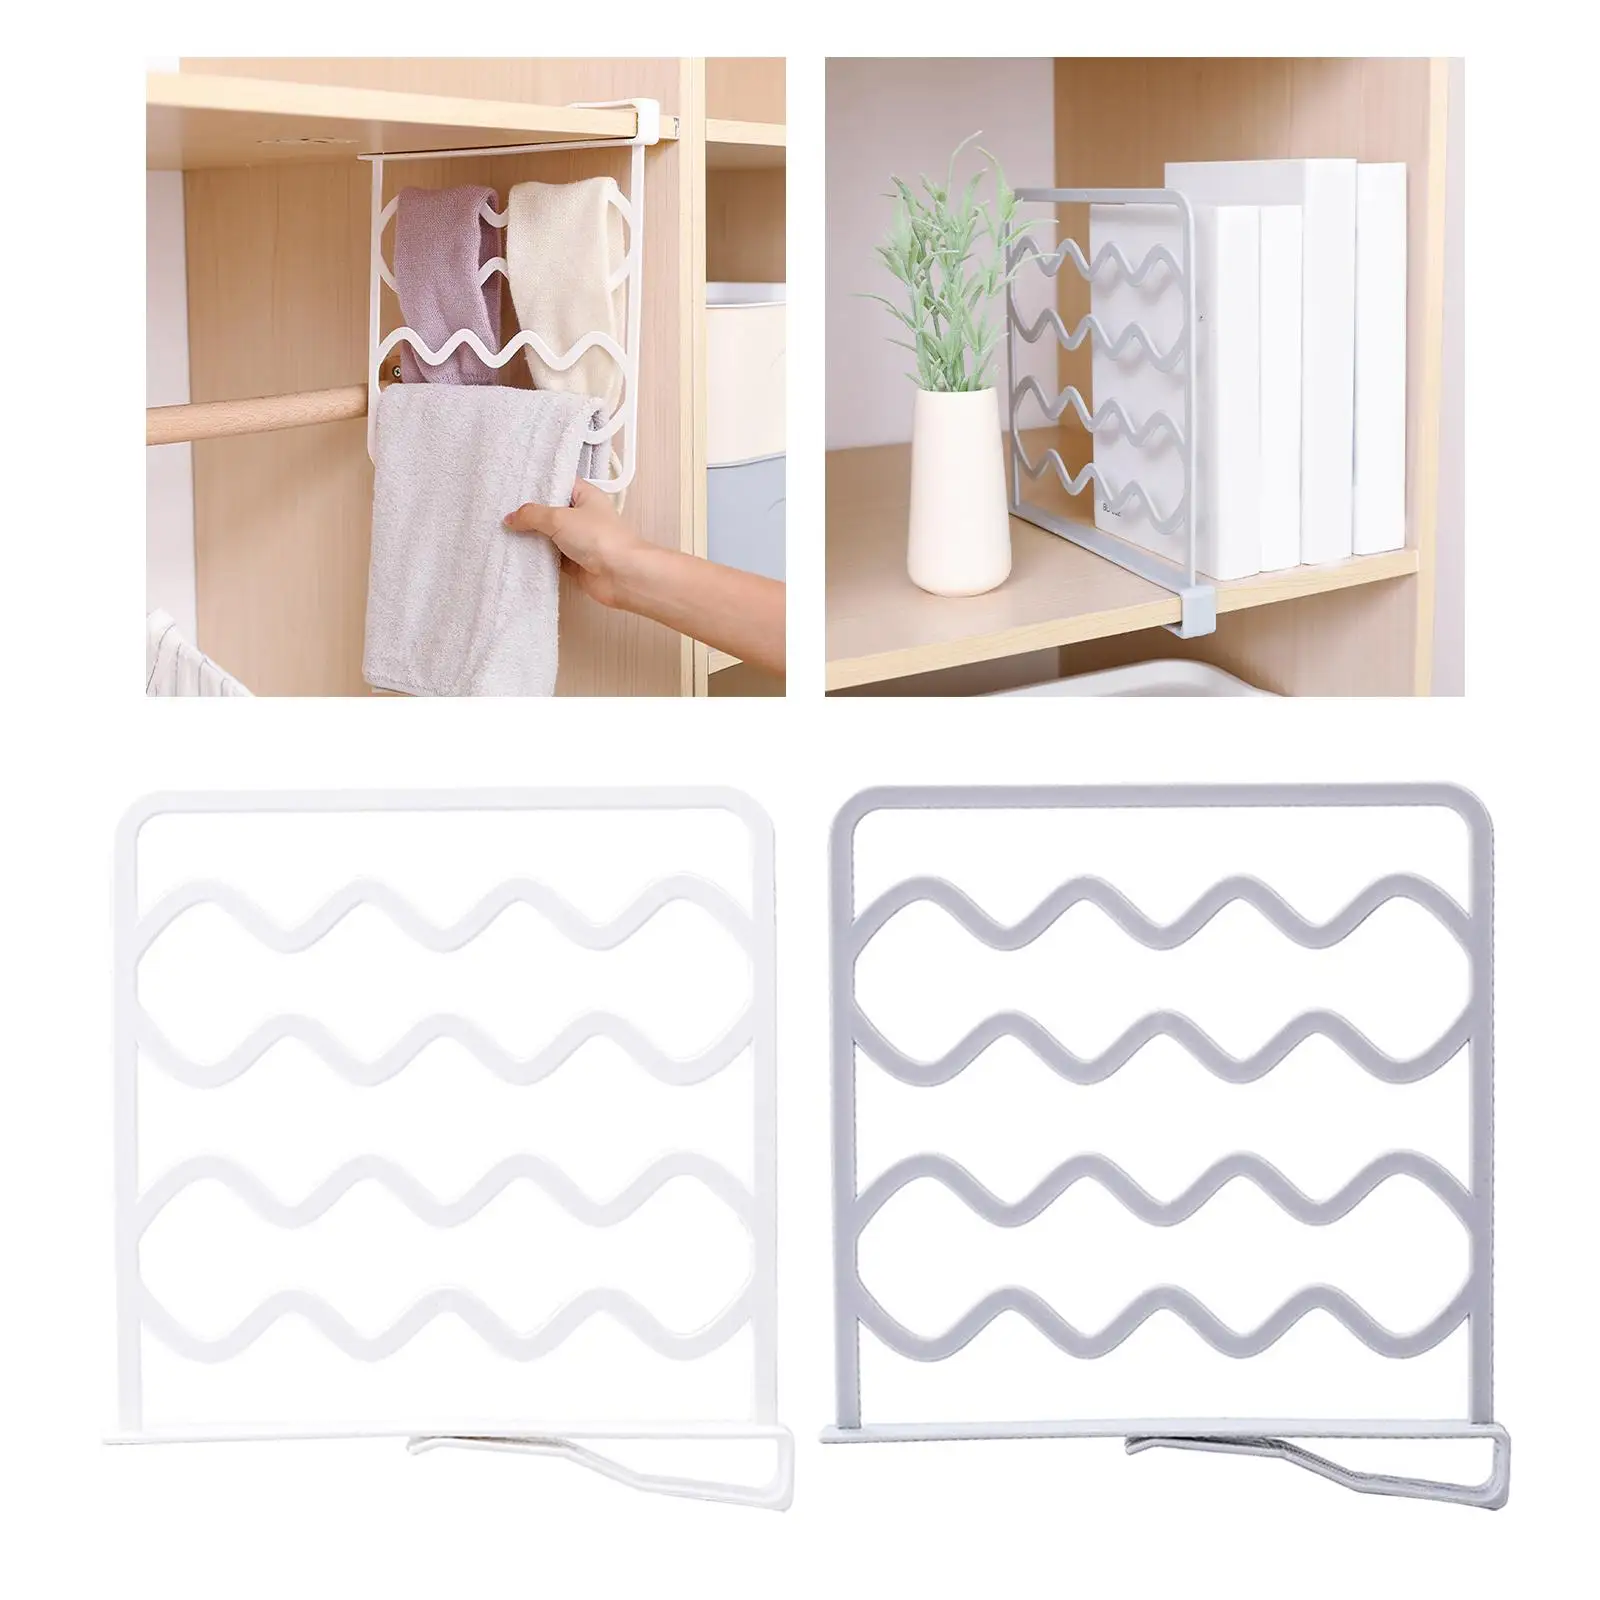 Household Closets Shelf Dividers Multifunctional Adjustable Partition Shelf for Bathroom Office Kitchen Hotel Baby Drawer